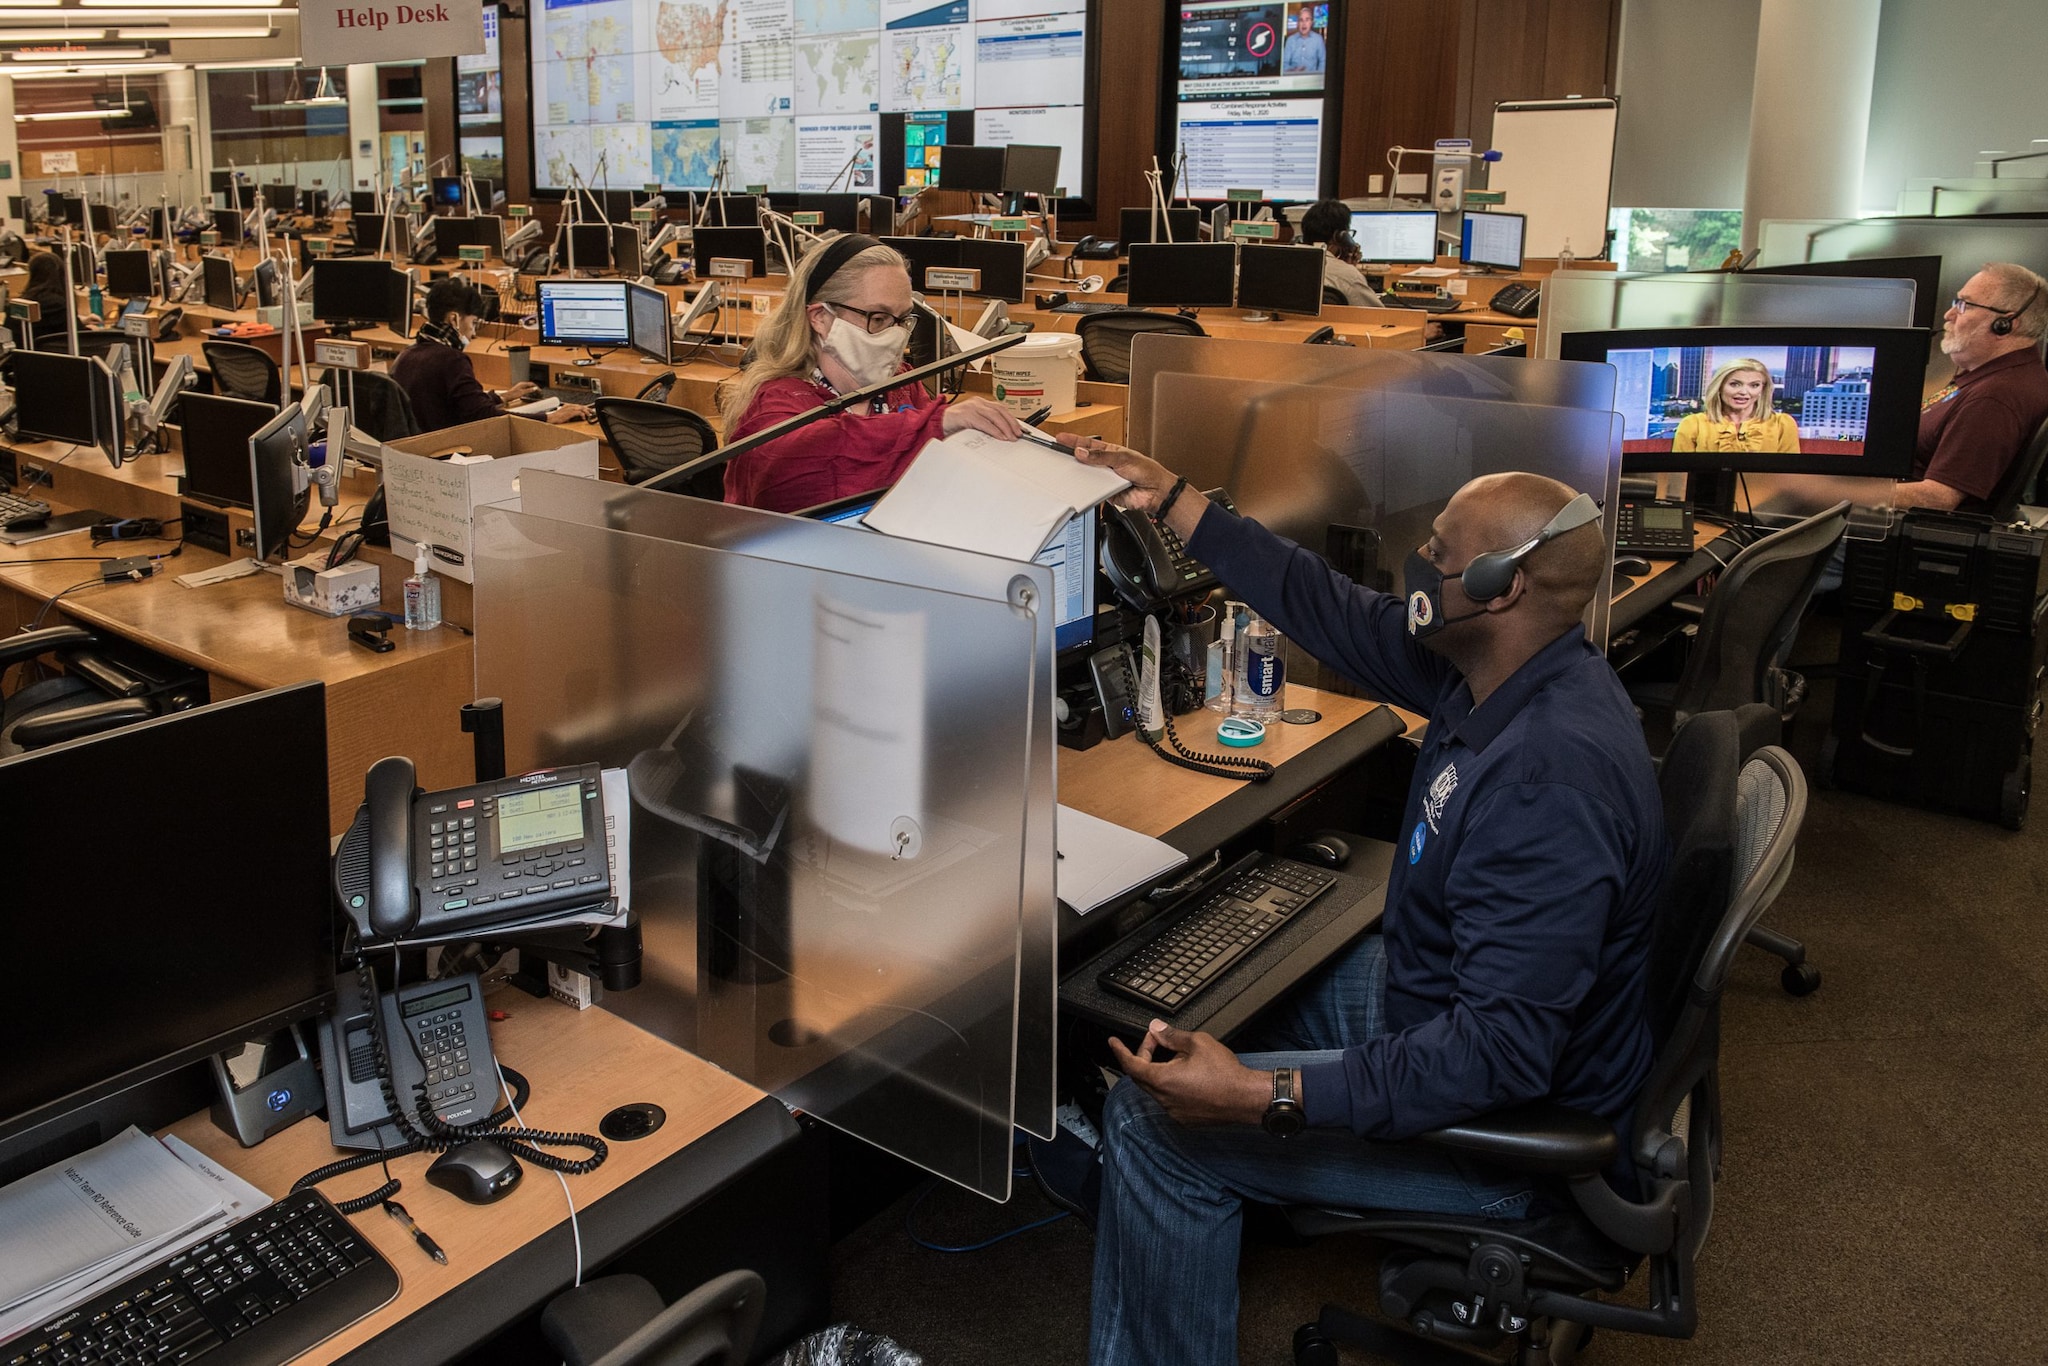 CDC staff working in the EOC during the COVID-19 pandemic response.